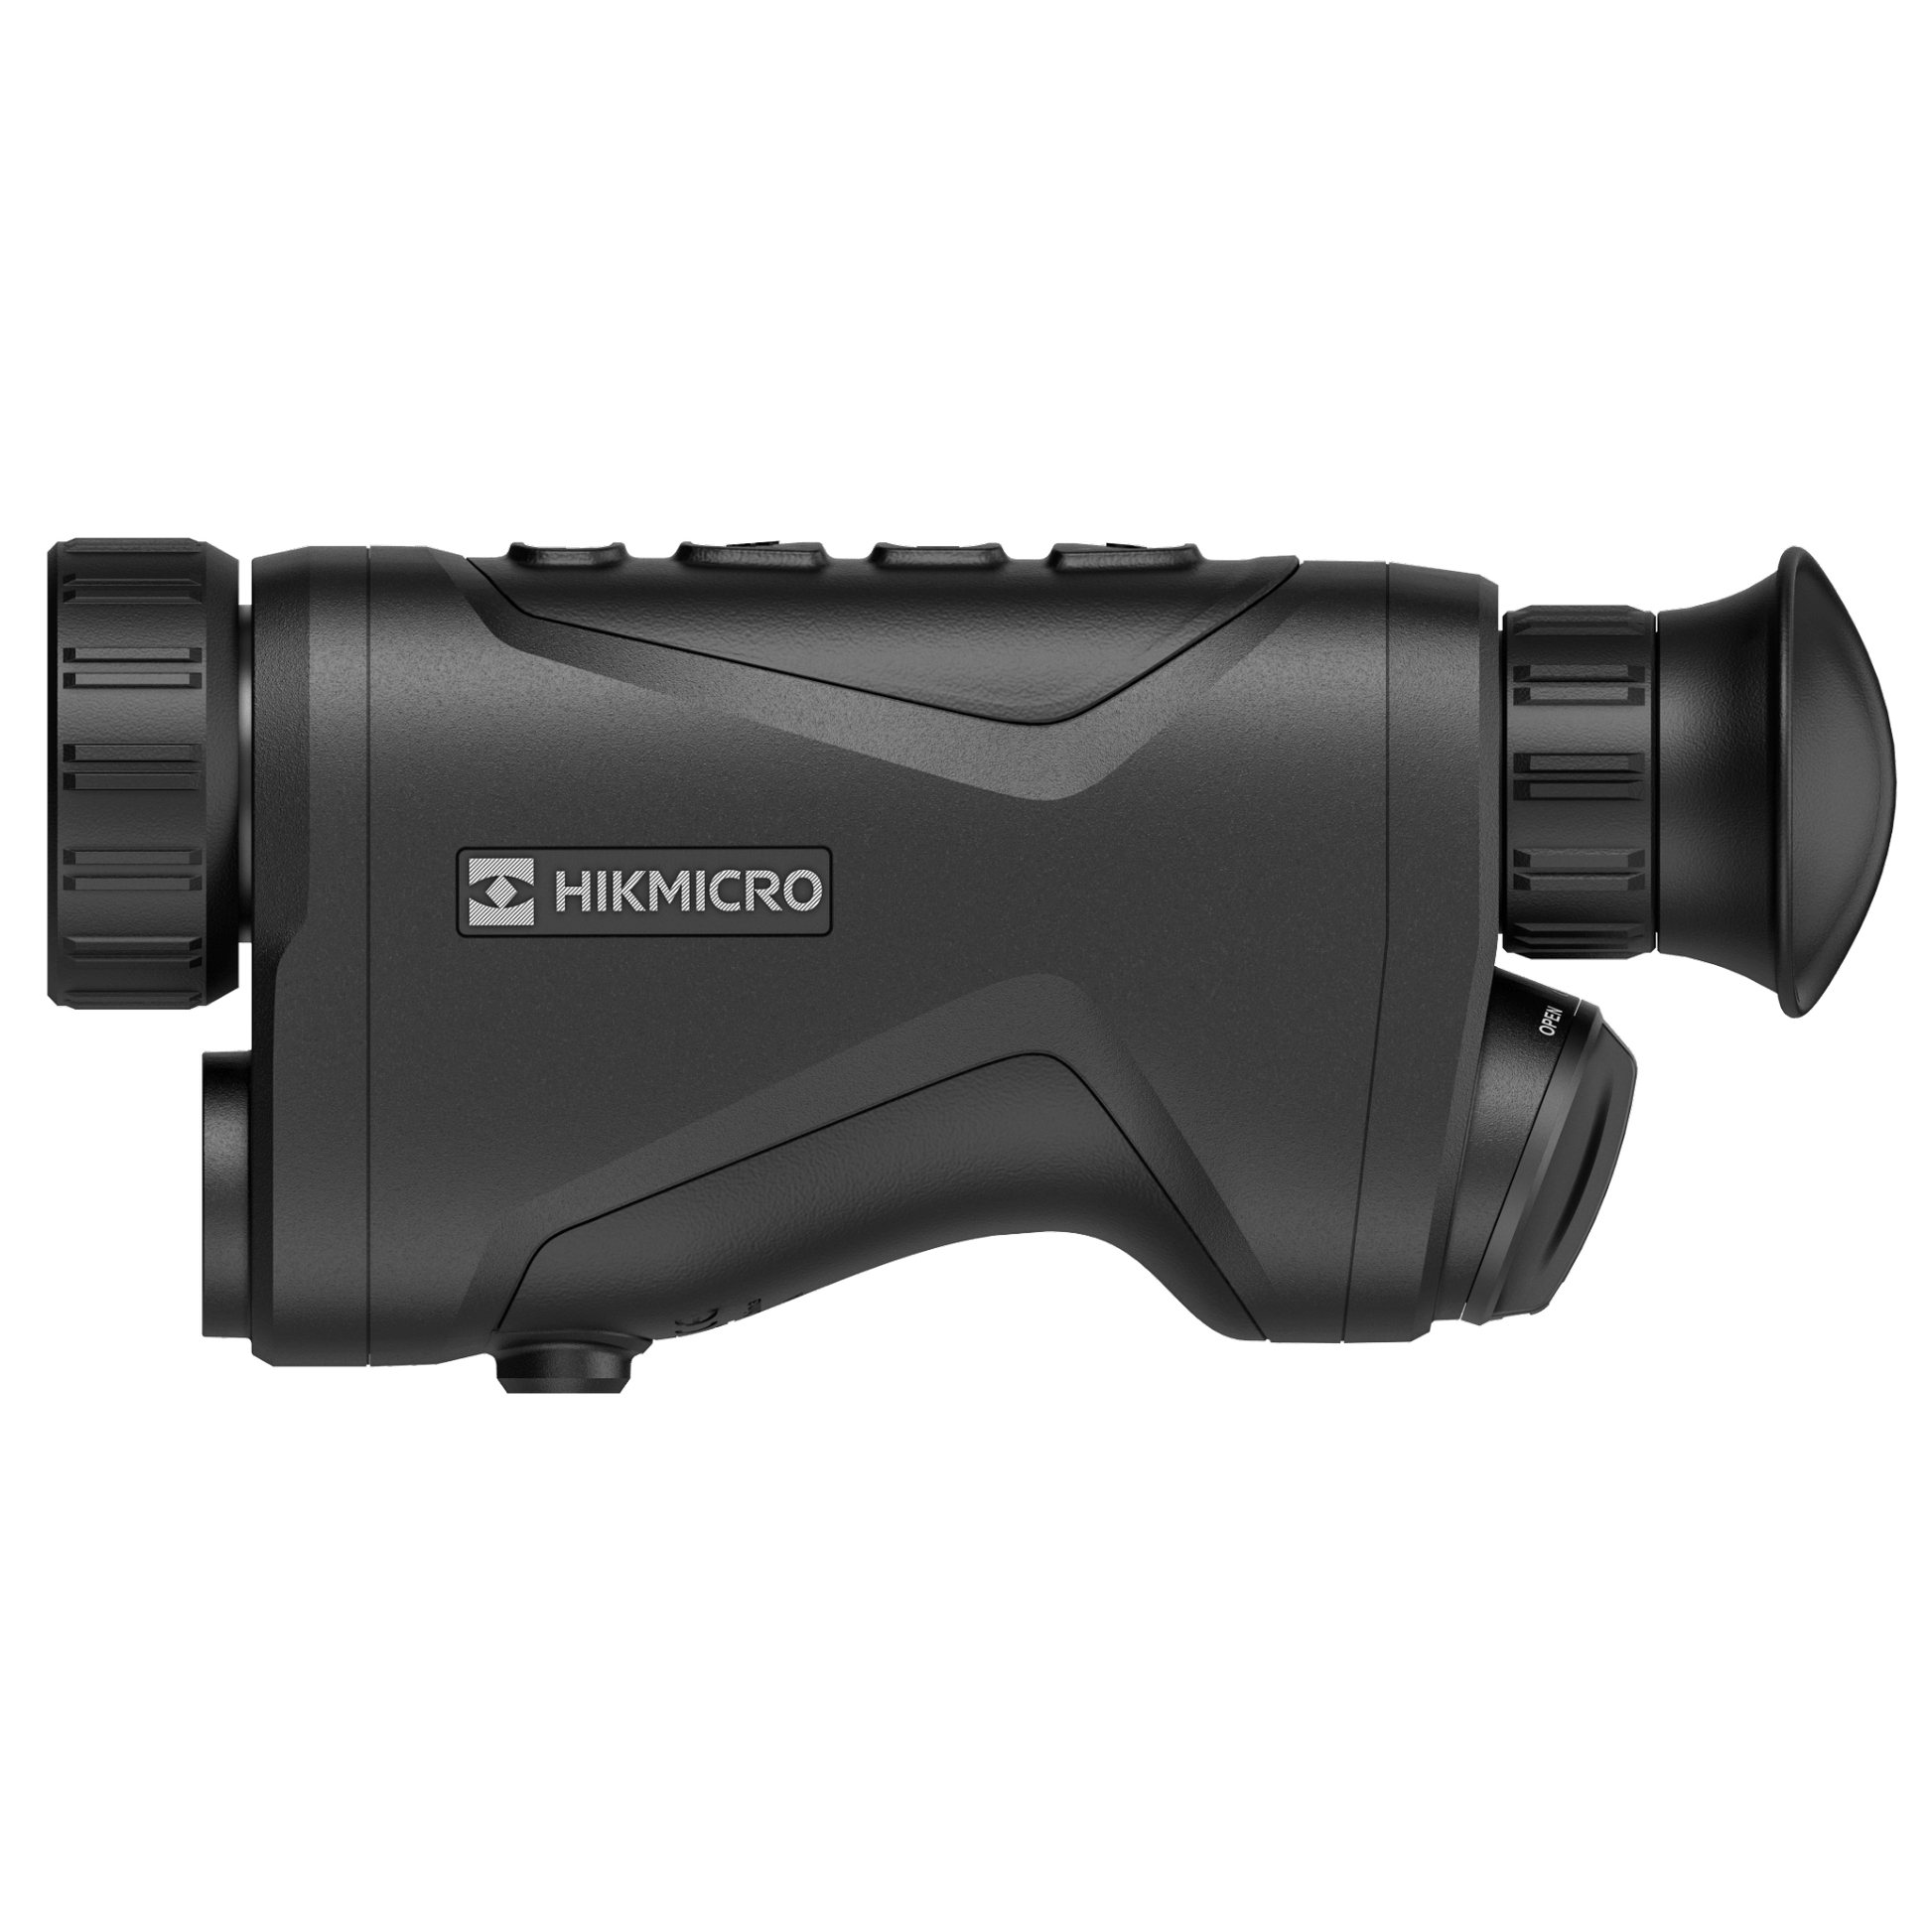 Side perspective of the HikMicro GH35L Thermal Monocular, highlighting its branded logo, sleek matte finish, and tactile control buttons. Perfect for advanced thermal imaging solutions in outdoor, hunting, and security applications.